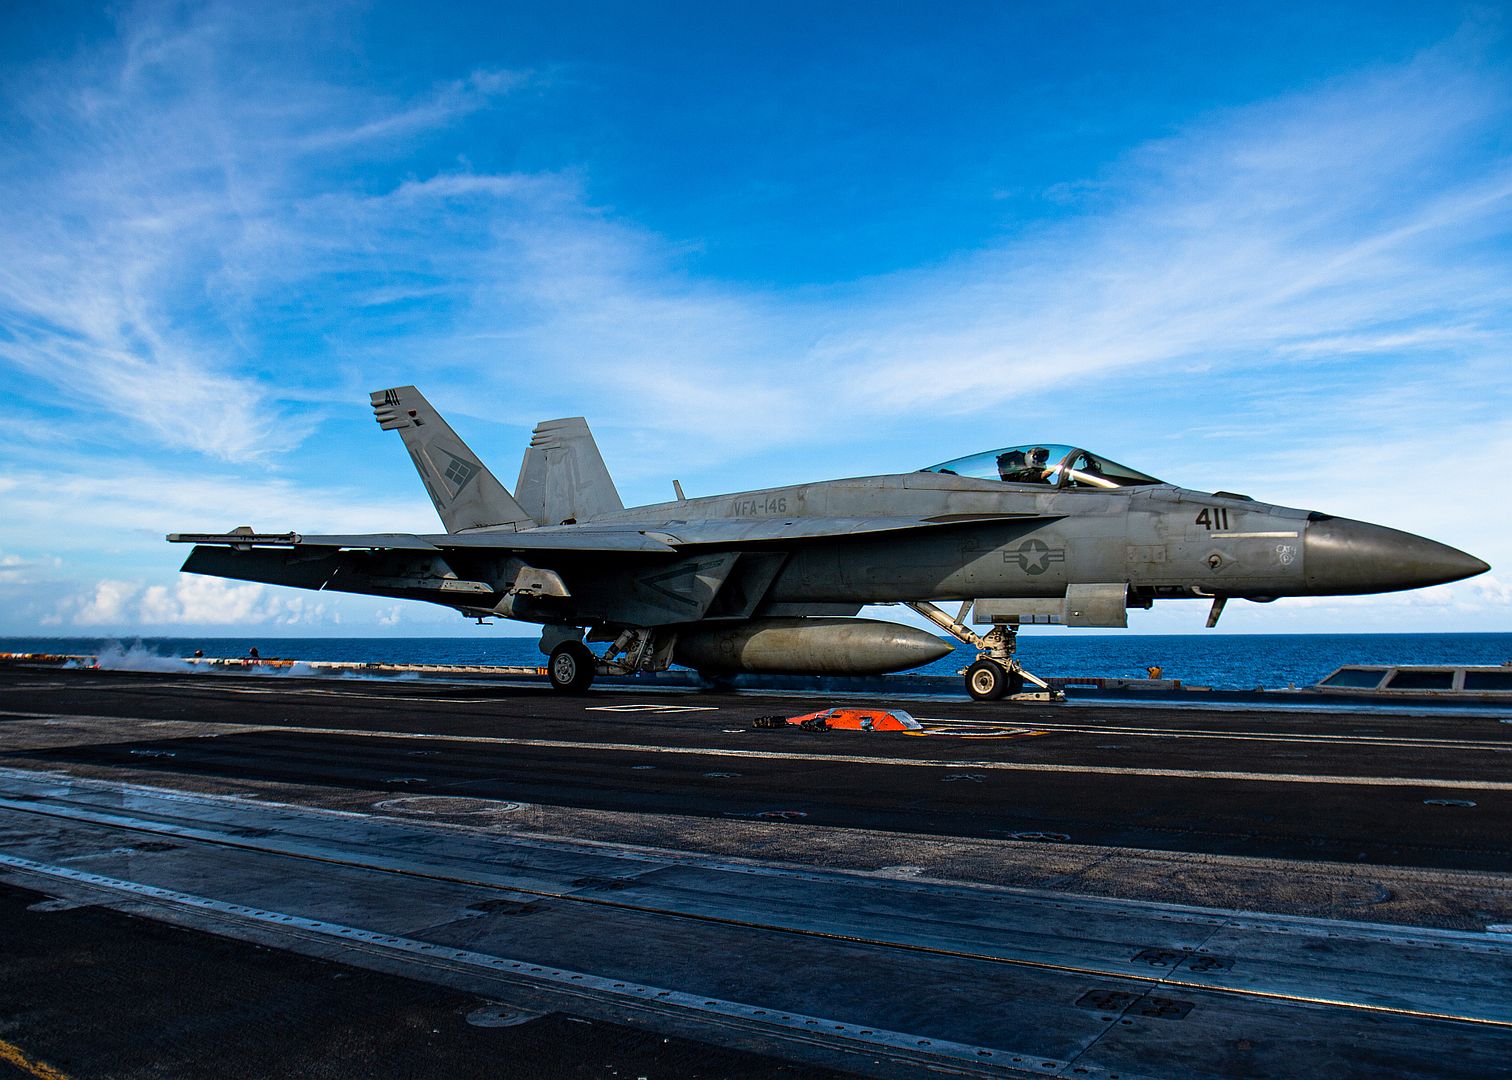  146 Launches From The Flight Deck Of The Aircraft Carrier USS Nimitz